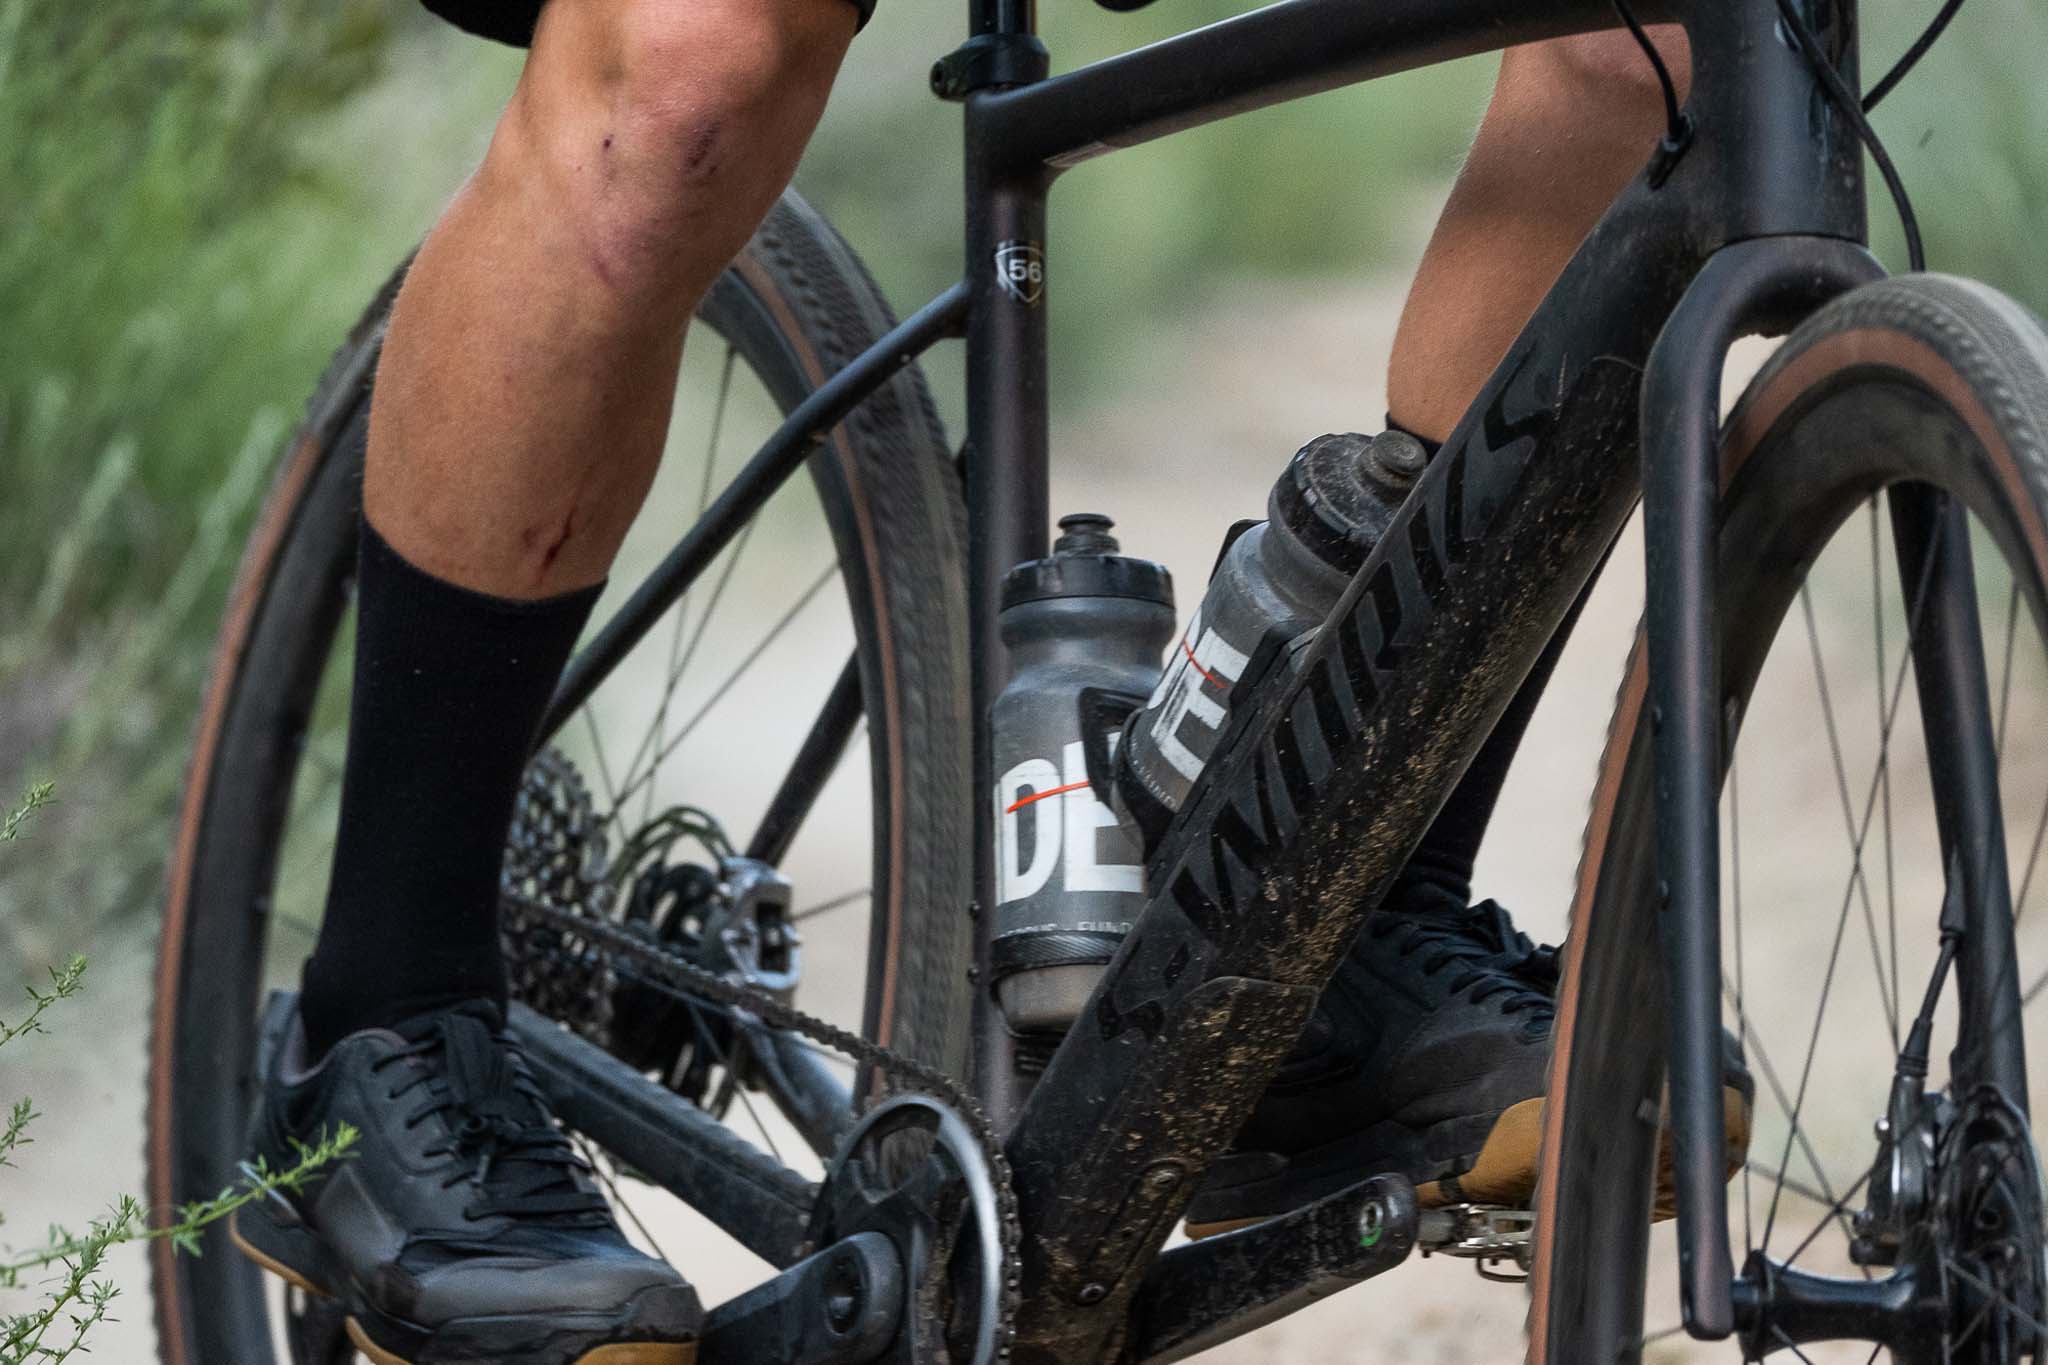 Specialized Diverge Expert Carbon | Strictly Bicycles